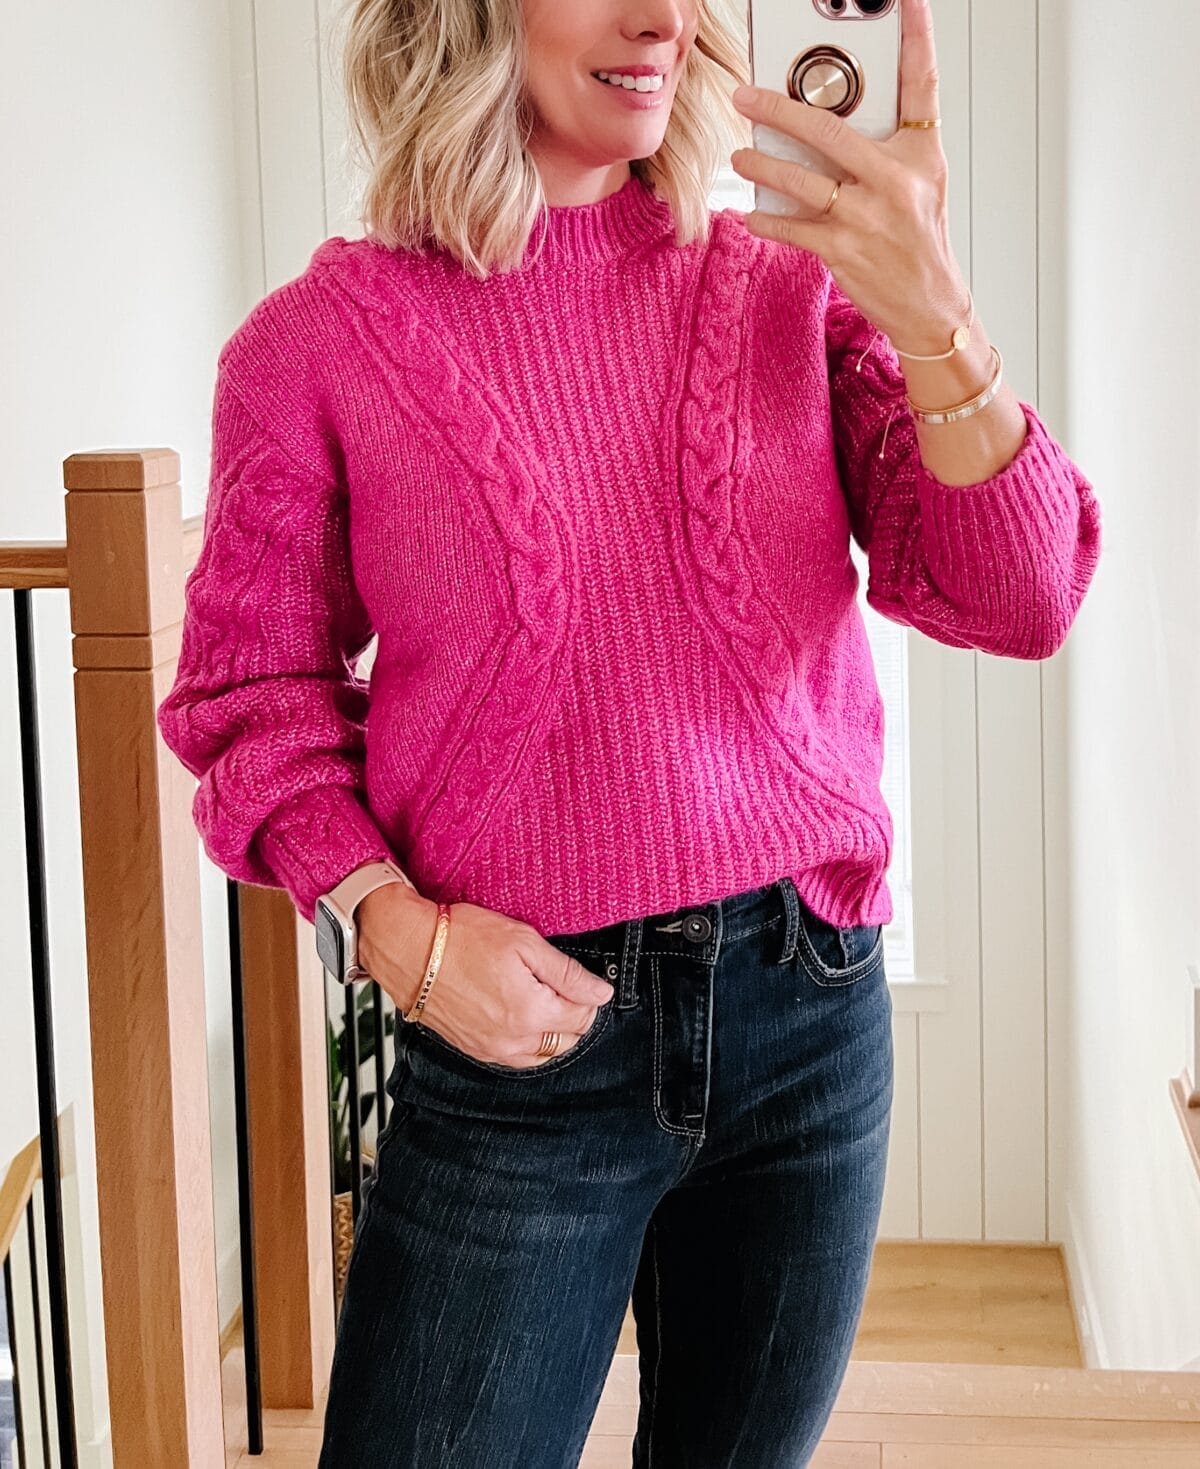 Walmart pink turtleneck sweater and jeans outfit